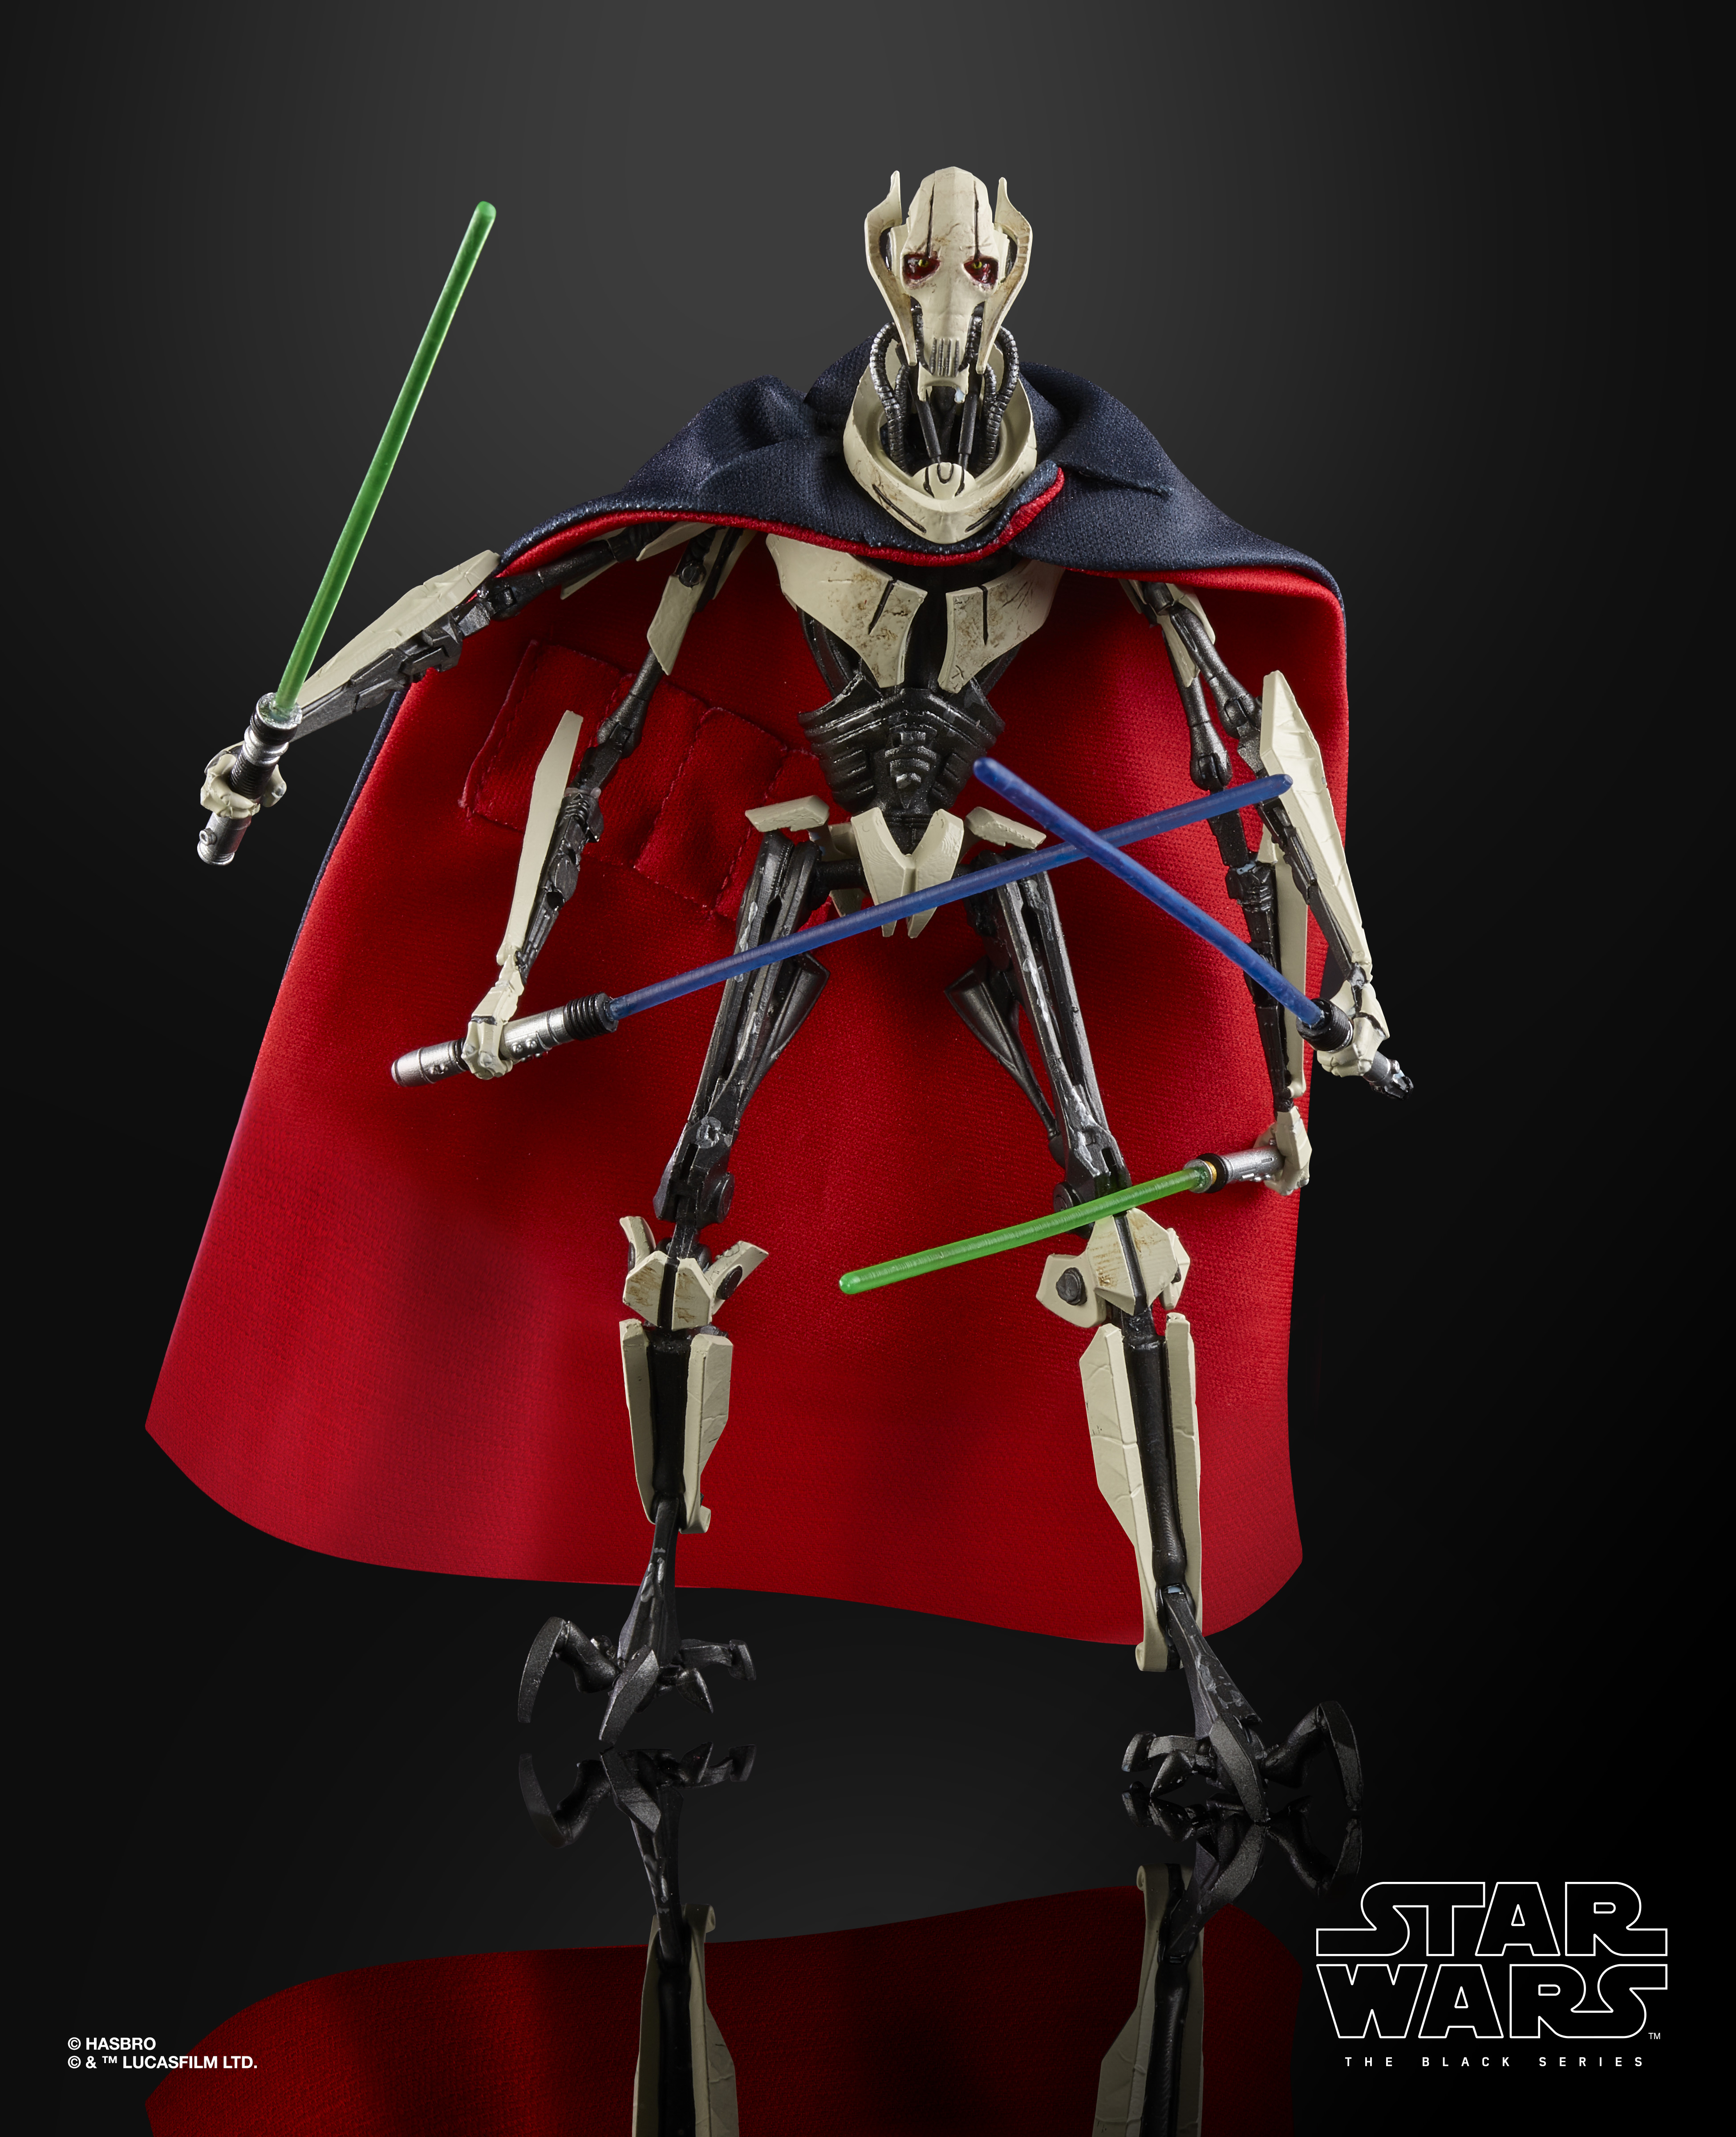 Pre-Order Available for General Grievous Black Series Figure